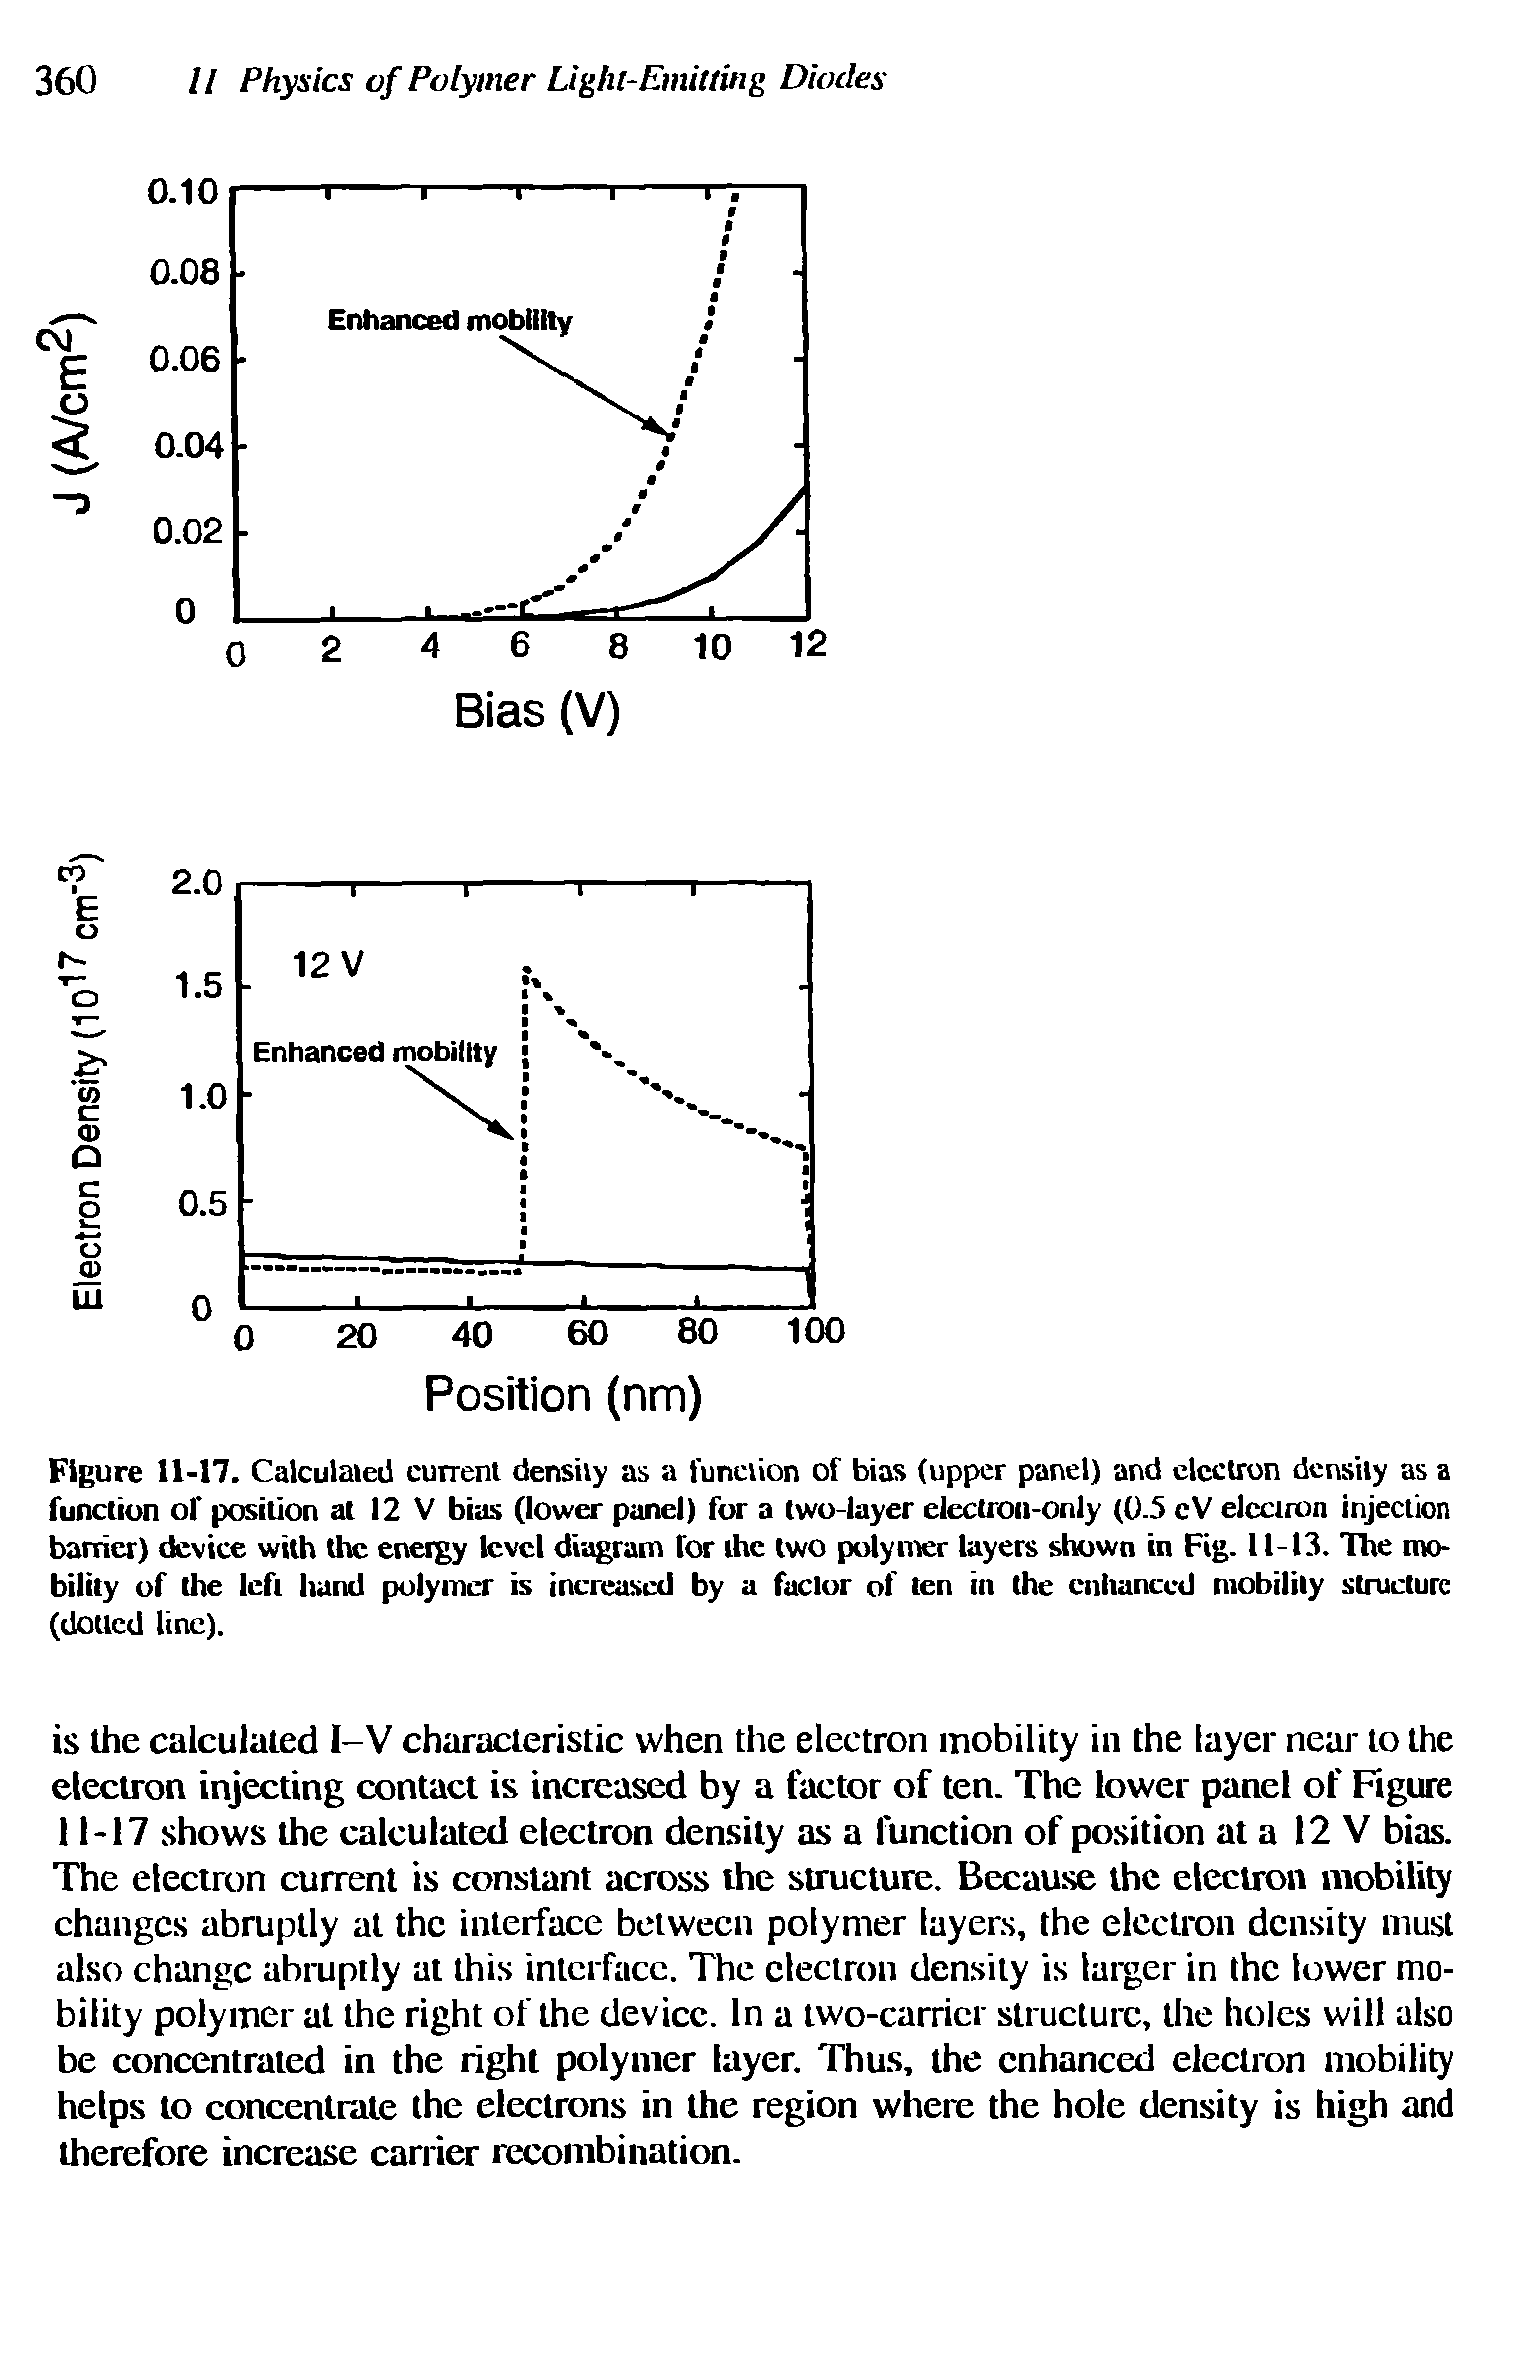 Figure 11-17. Calculated current density as a function of bias (upper panel) and electron density as a function of position at 12 V bias (lower panel) for a two-layer electron-only (0.5 cV electron injection barrier) device with the energy level diagram for the two polymer layers shown in Fig. 11-13. The mobility of the left hand polymer is increased by a factor of ten in the enhanced mobility structure (dotted line).